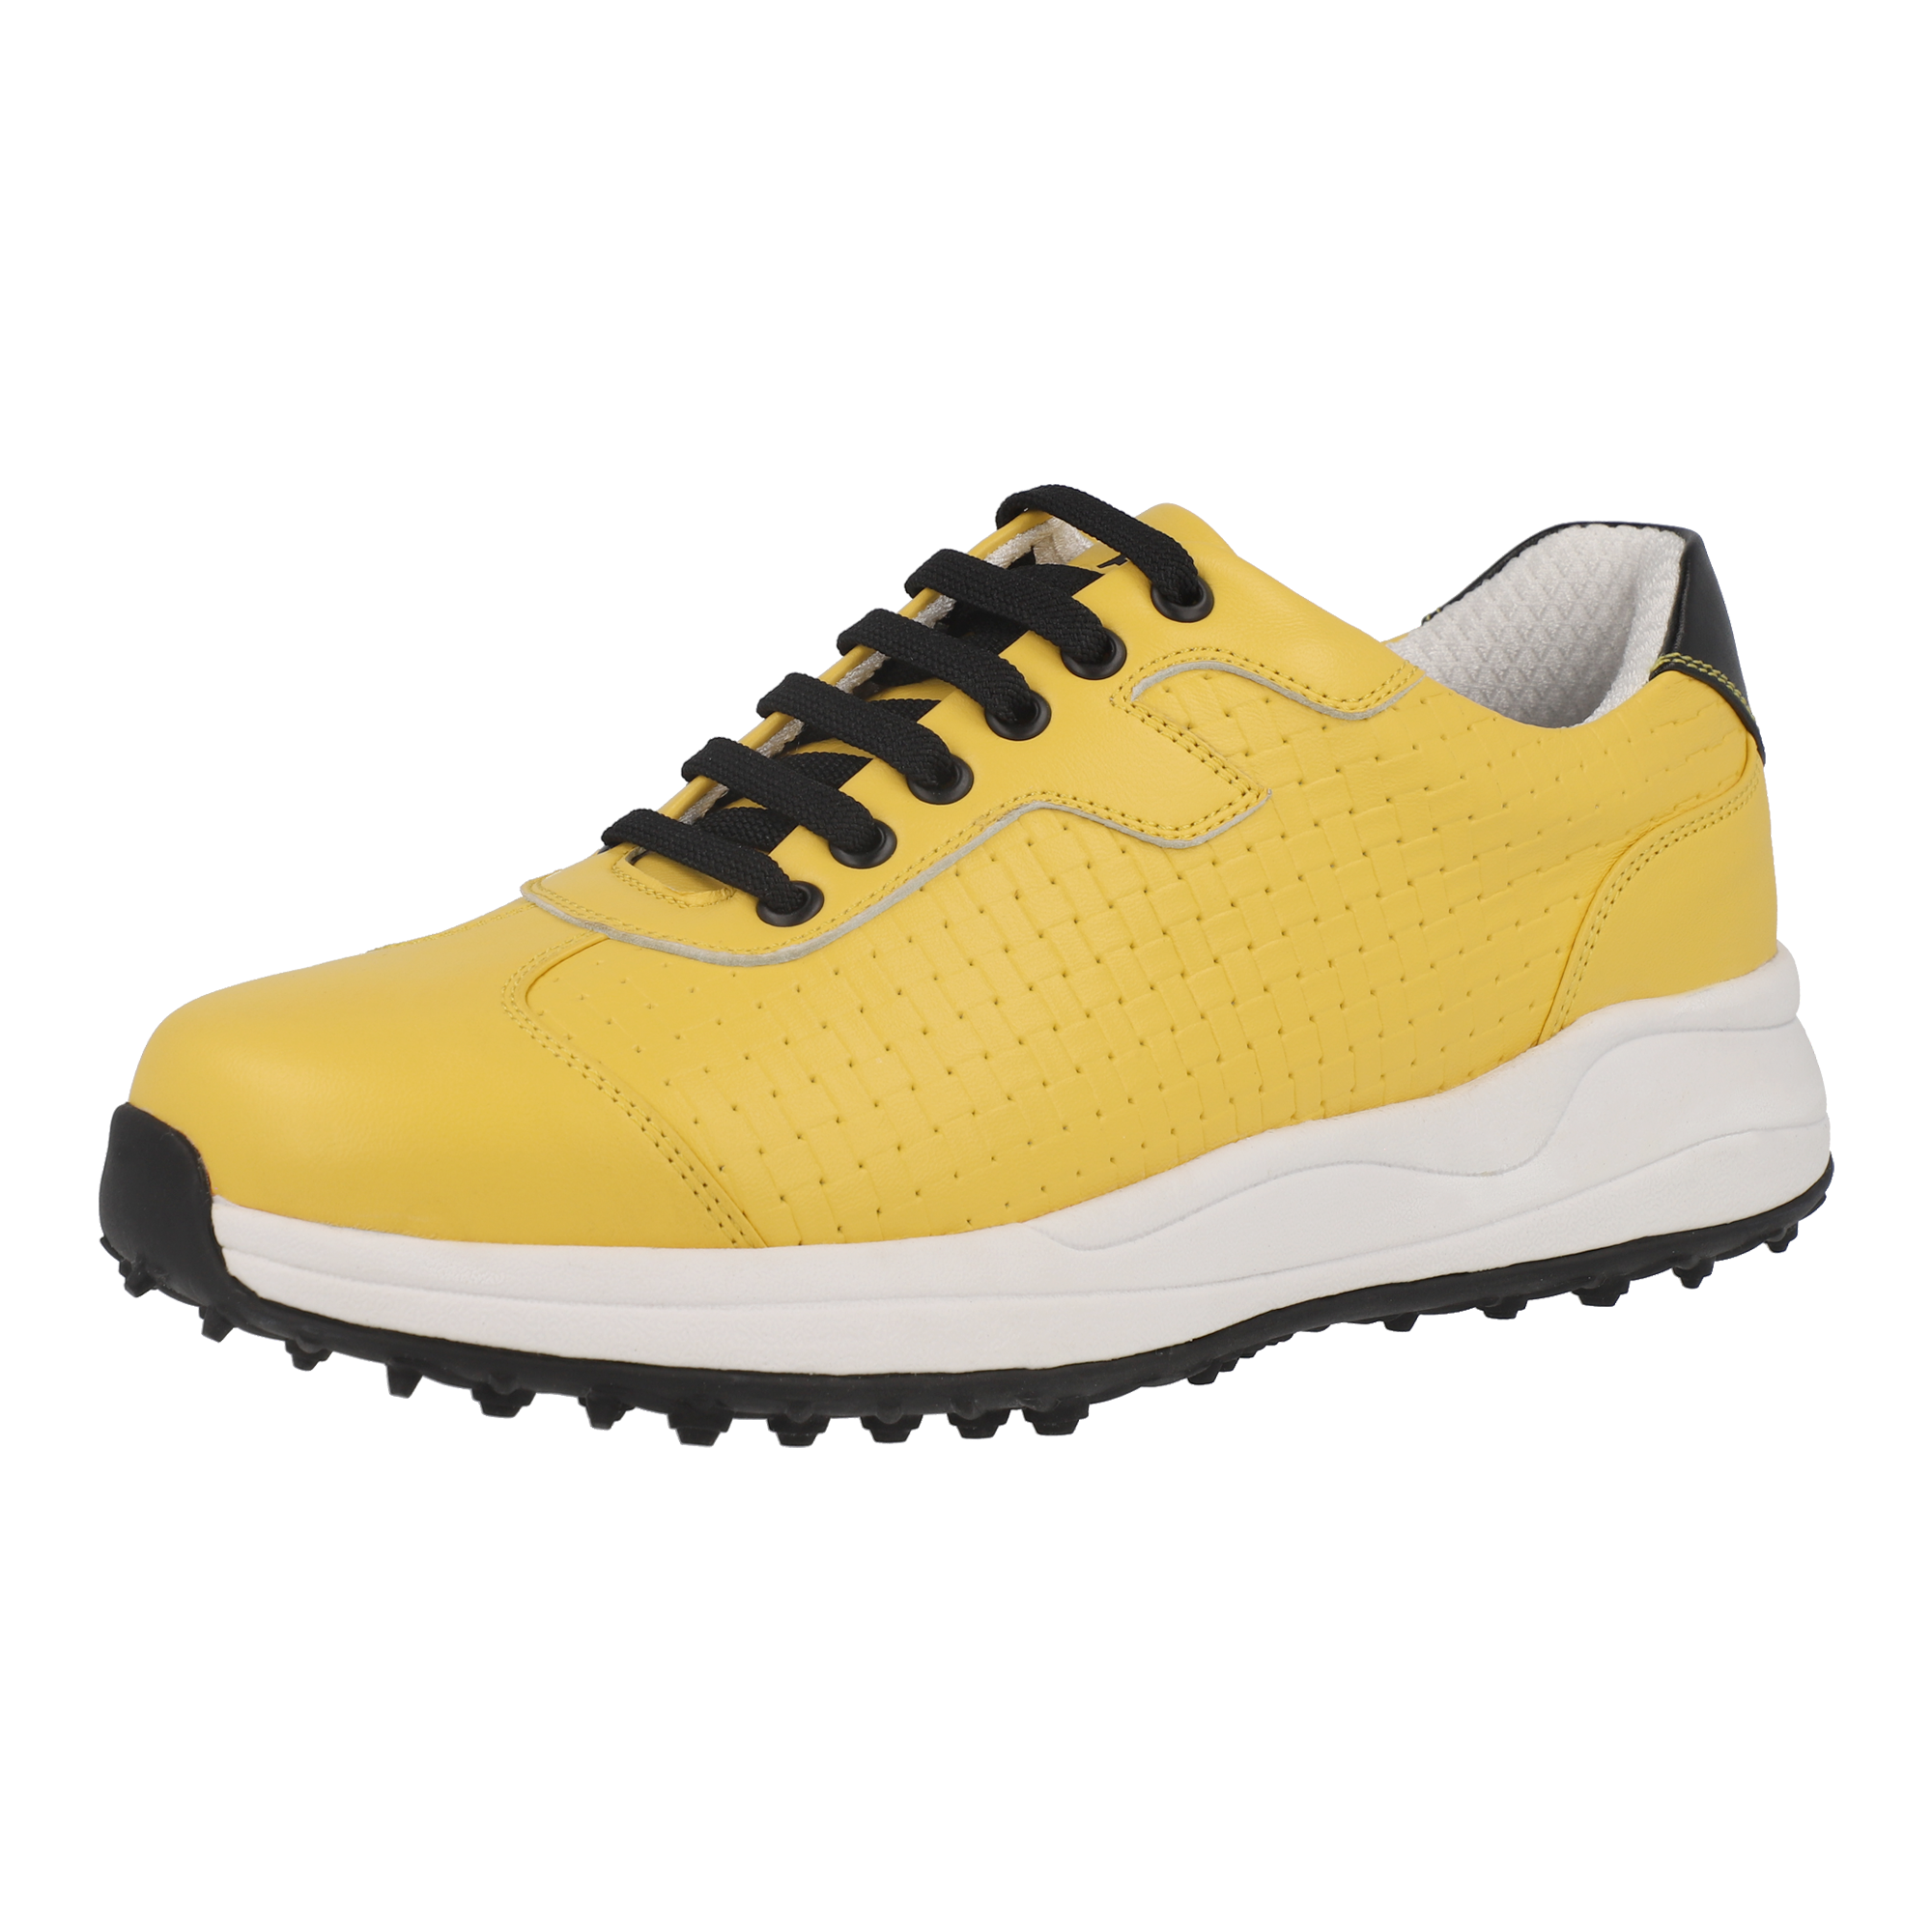 FITTEREST Spider Wave Golf Shoes for Women - FTR23 W SS YL207